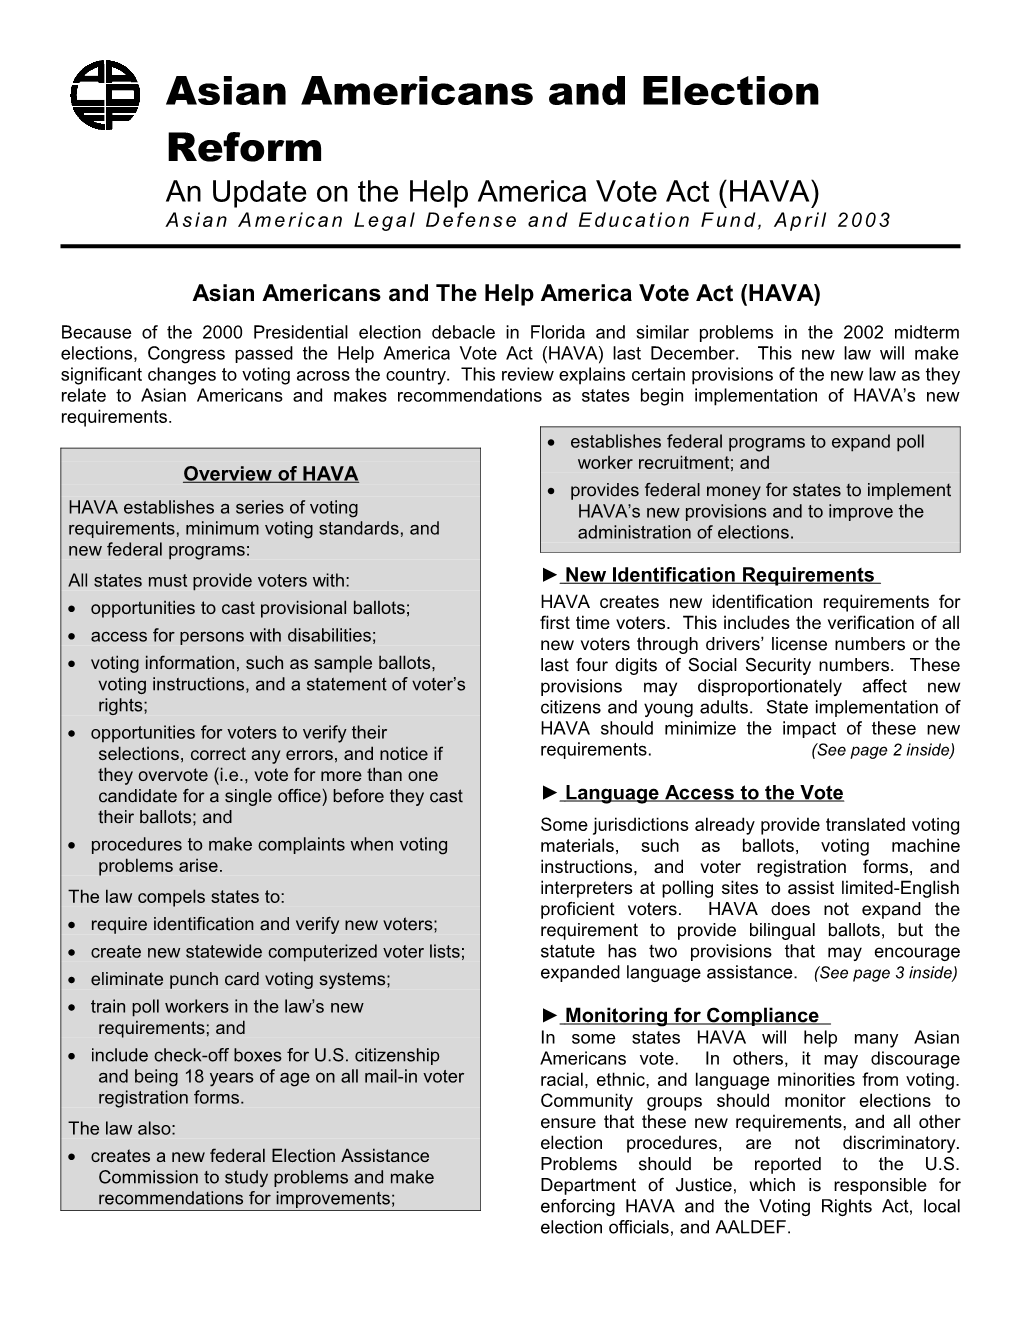 Section 301 of the Help Americna Vote Act (HAVA) Provides for Alternative Language Accessiblity